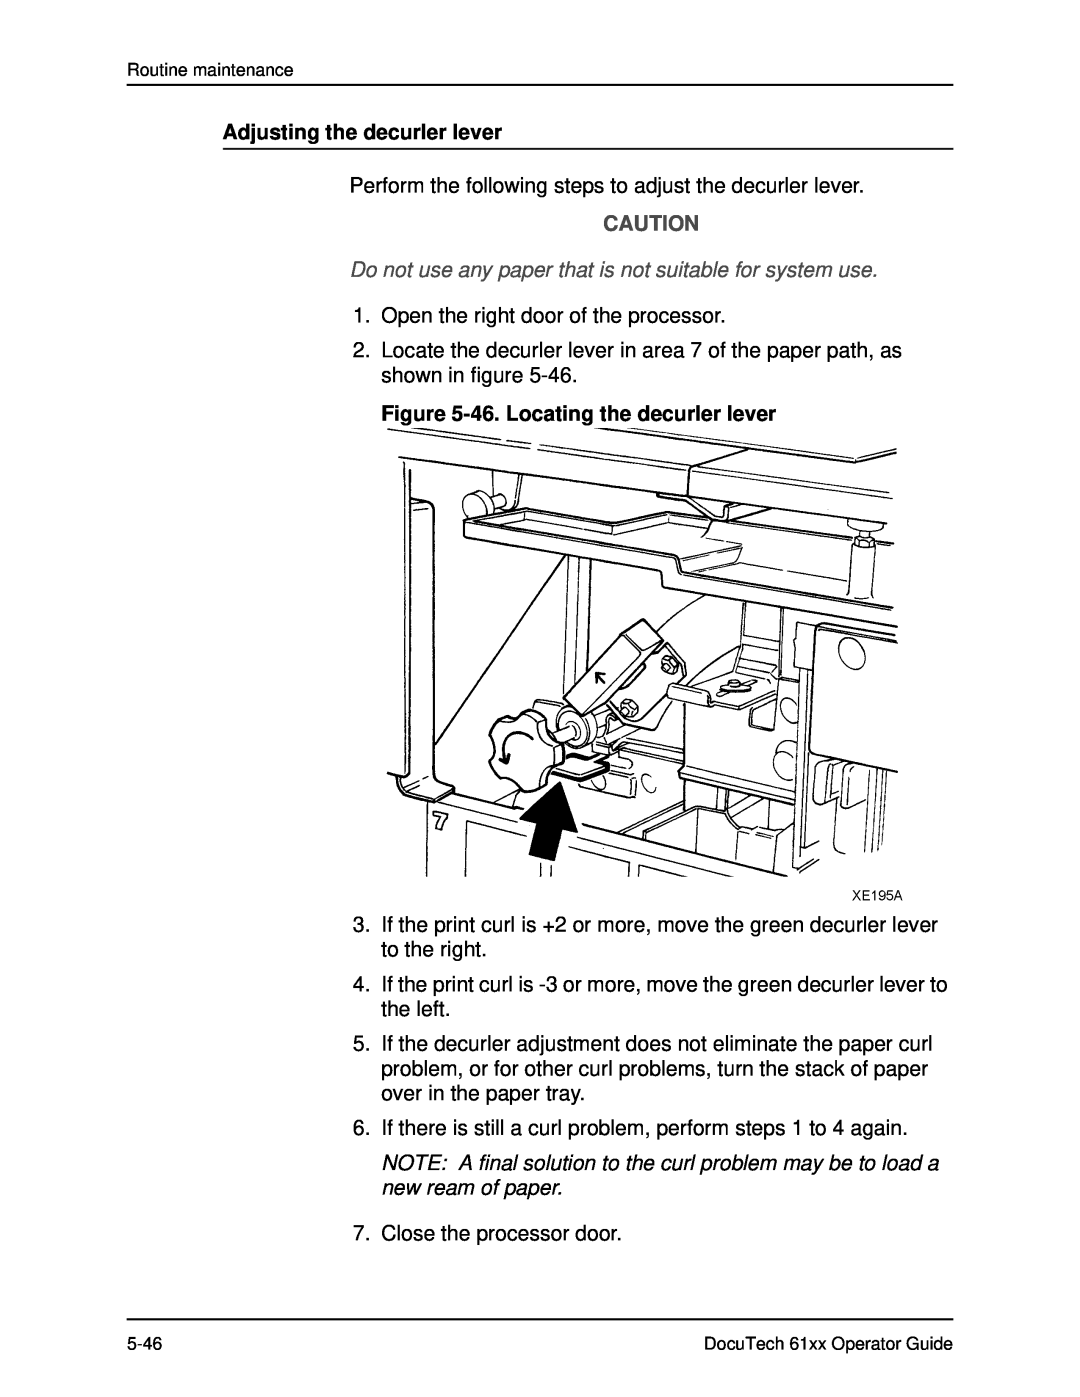 Xerox 61xx manual Adjusting the decurler lever, Do not use any paper that is not suitable for system use 